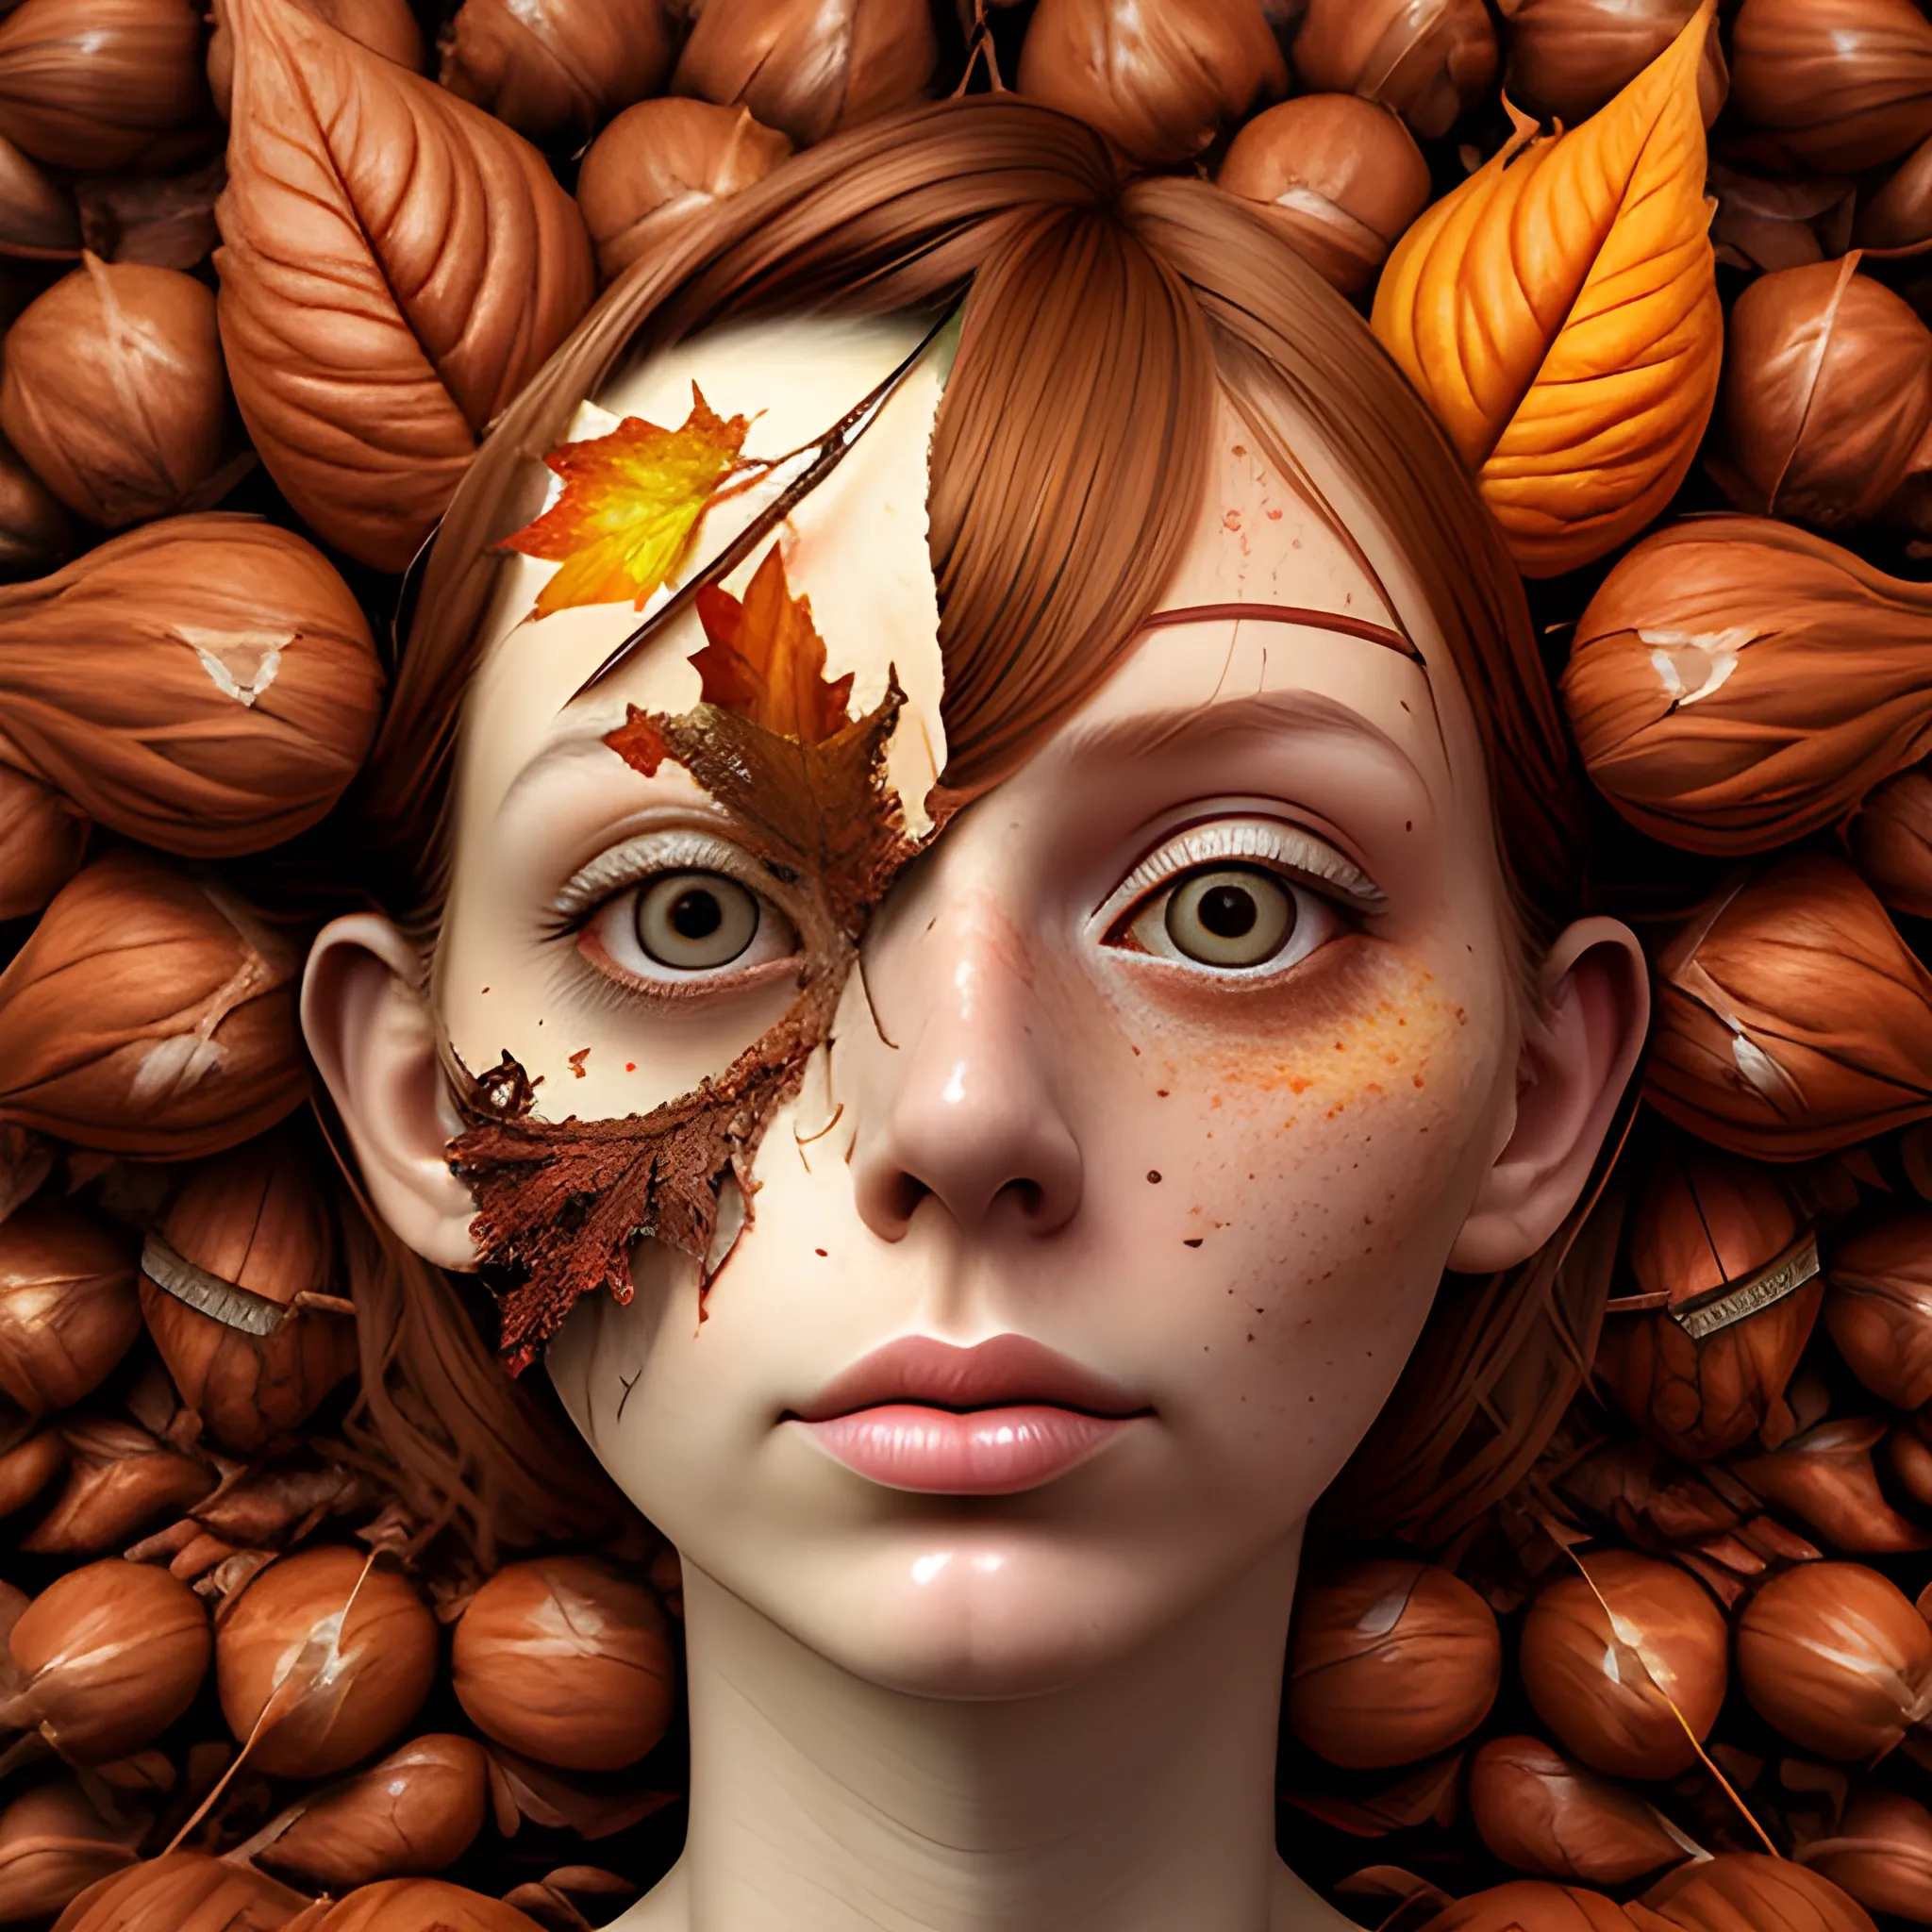 make a chestnut look like a female human face, close up, saturated colors, surrealism, chaotic background many chestnuts and chestnut leaves floating around  3D, Trippy, eerie atmosphere, close up, illustration, angular perspective